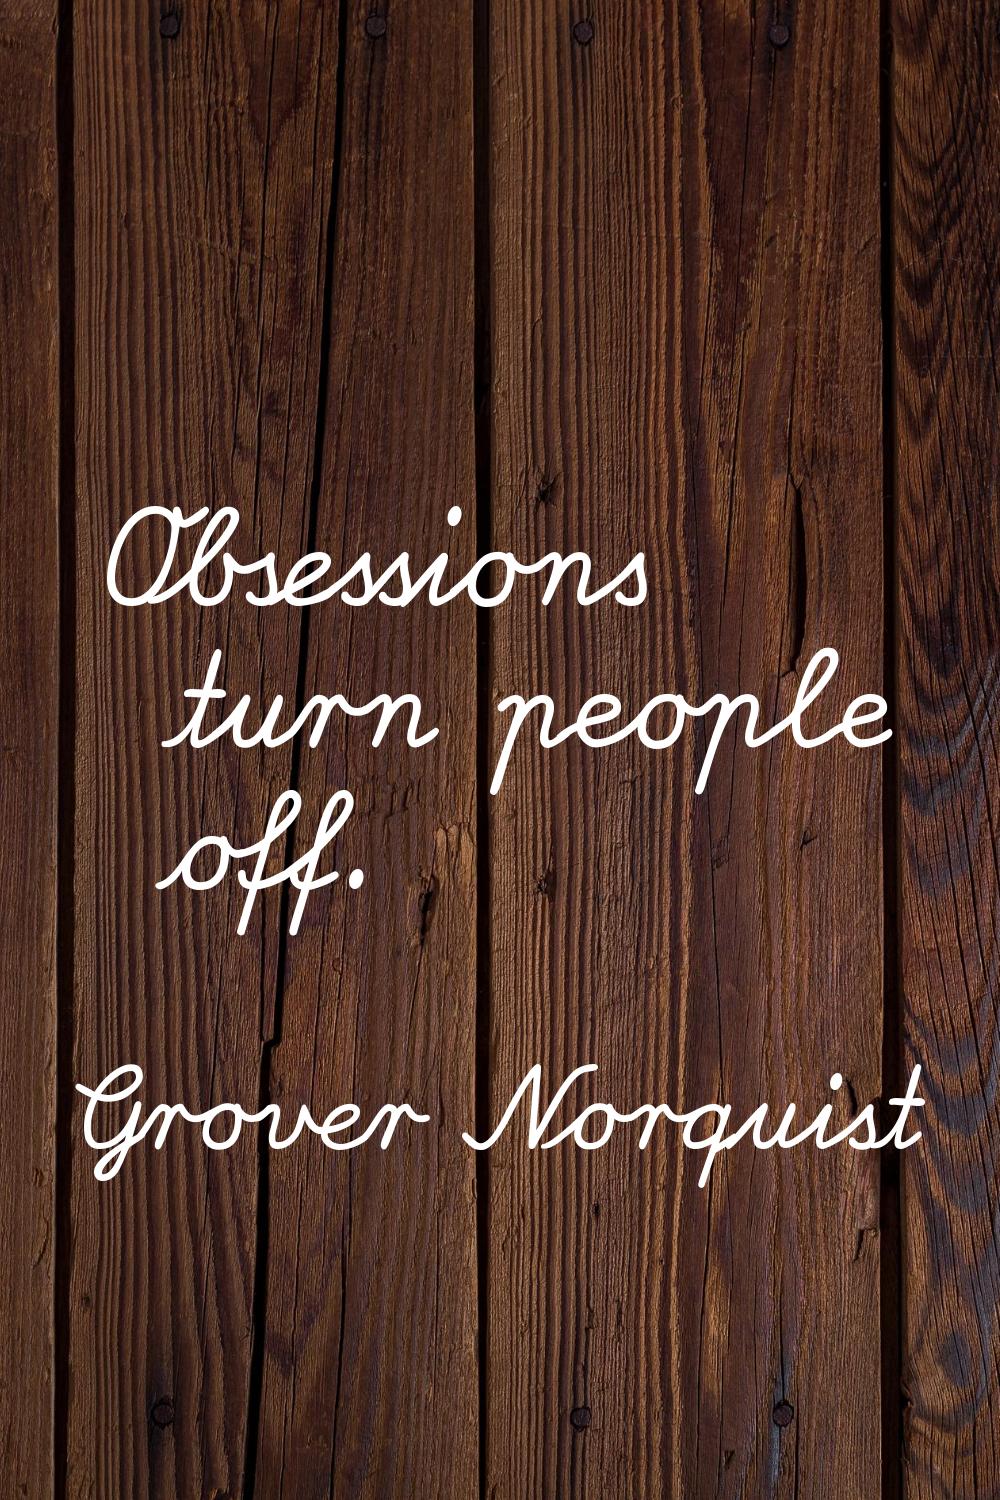 Obsessions turn people off.